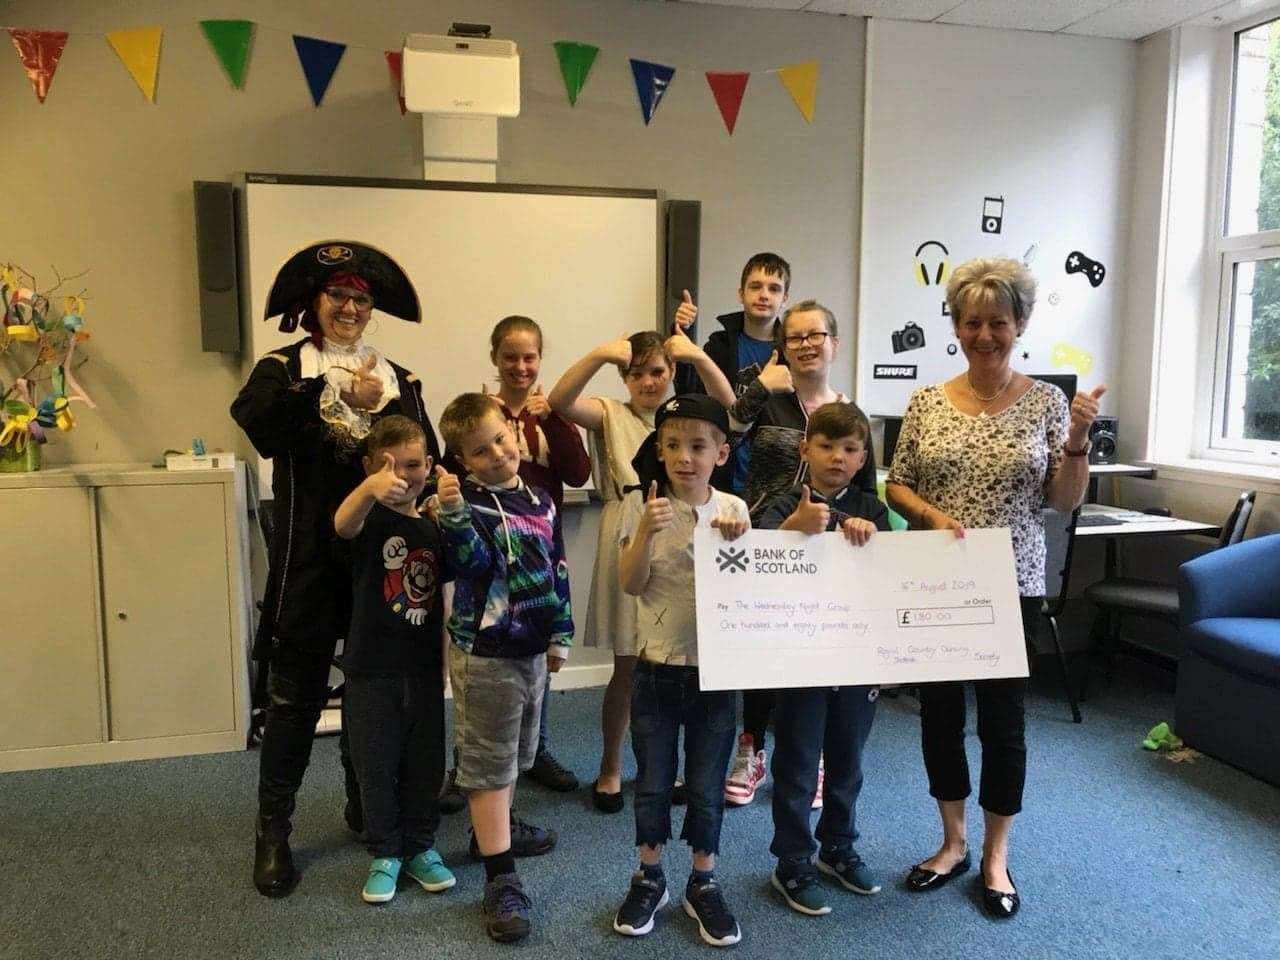 Christine Grant dropped in that morning with a special surprise of £180 which was raised by the Royal Scottish Country Dancing Society at their summer dance where raffles were sold, proceeds going to the Wednesday Night Group! Accepting the cheque (left to right) are Irene Muircroft (aka Jack Sparrow!), Aiden Dey, Elizabeth Quinn, Ruairidh Fraser, Hayden Robertson, Nicola Quinn and Mason Mawhinney are with Christine Grant in the photo.